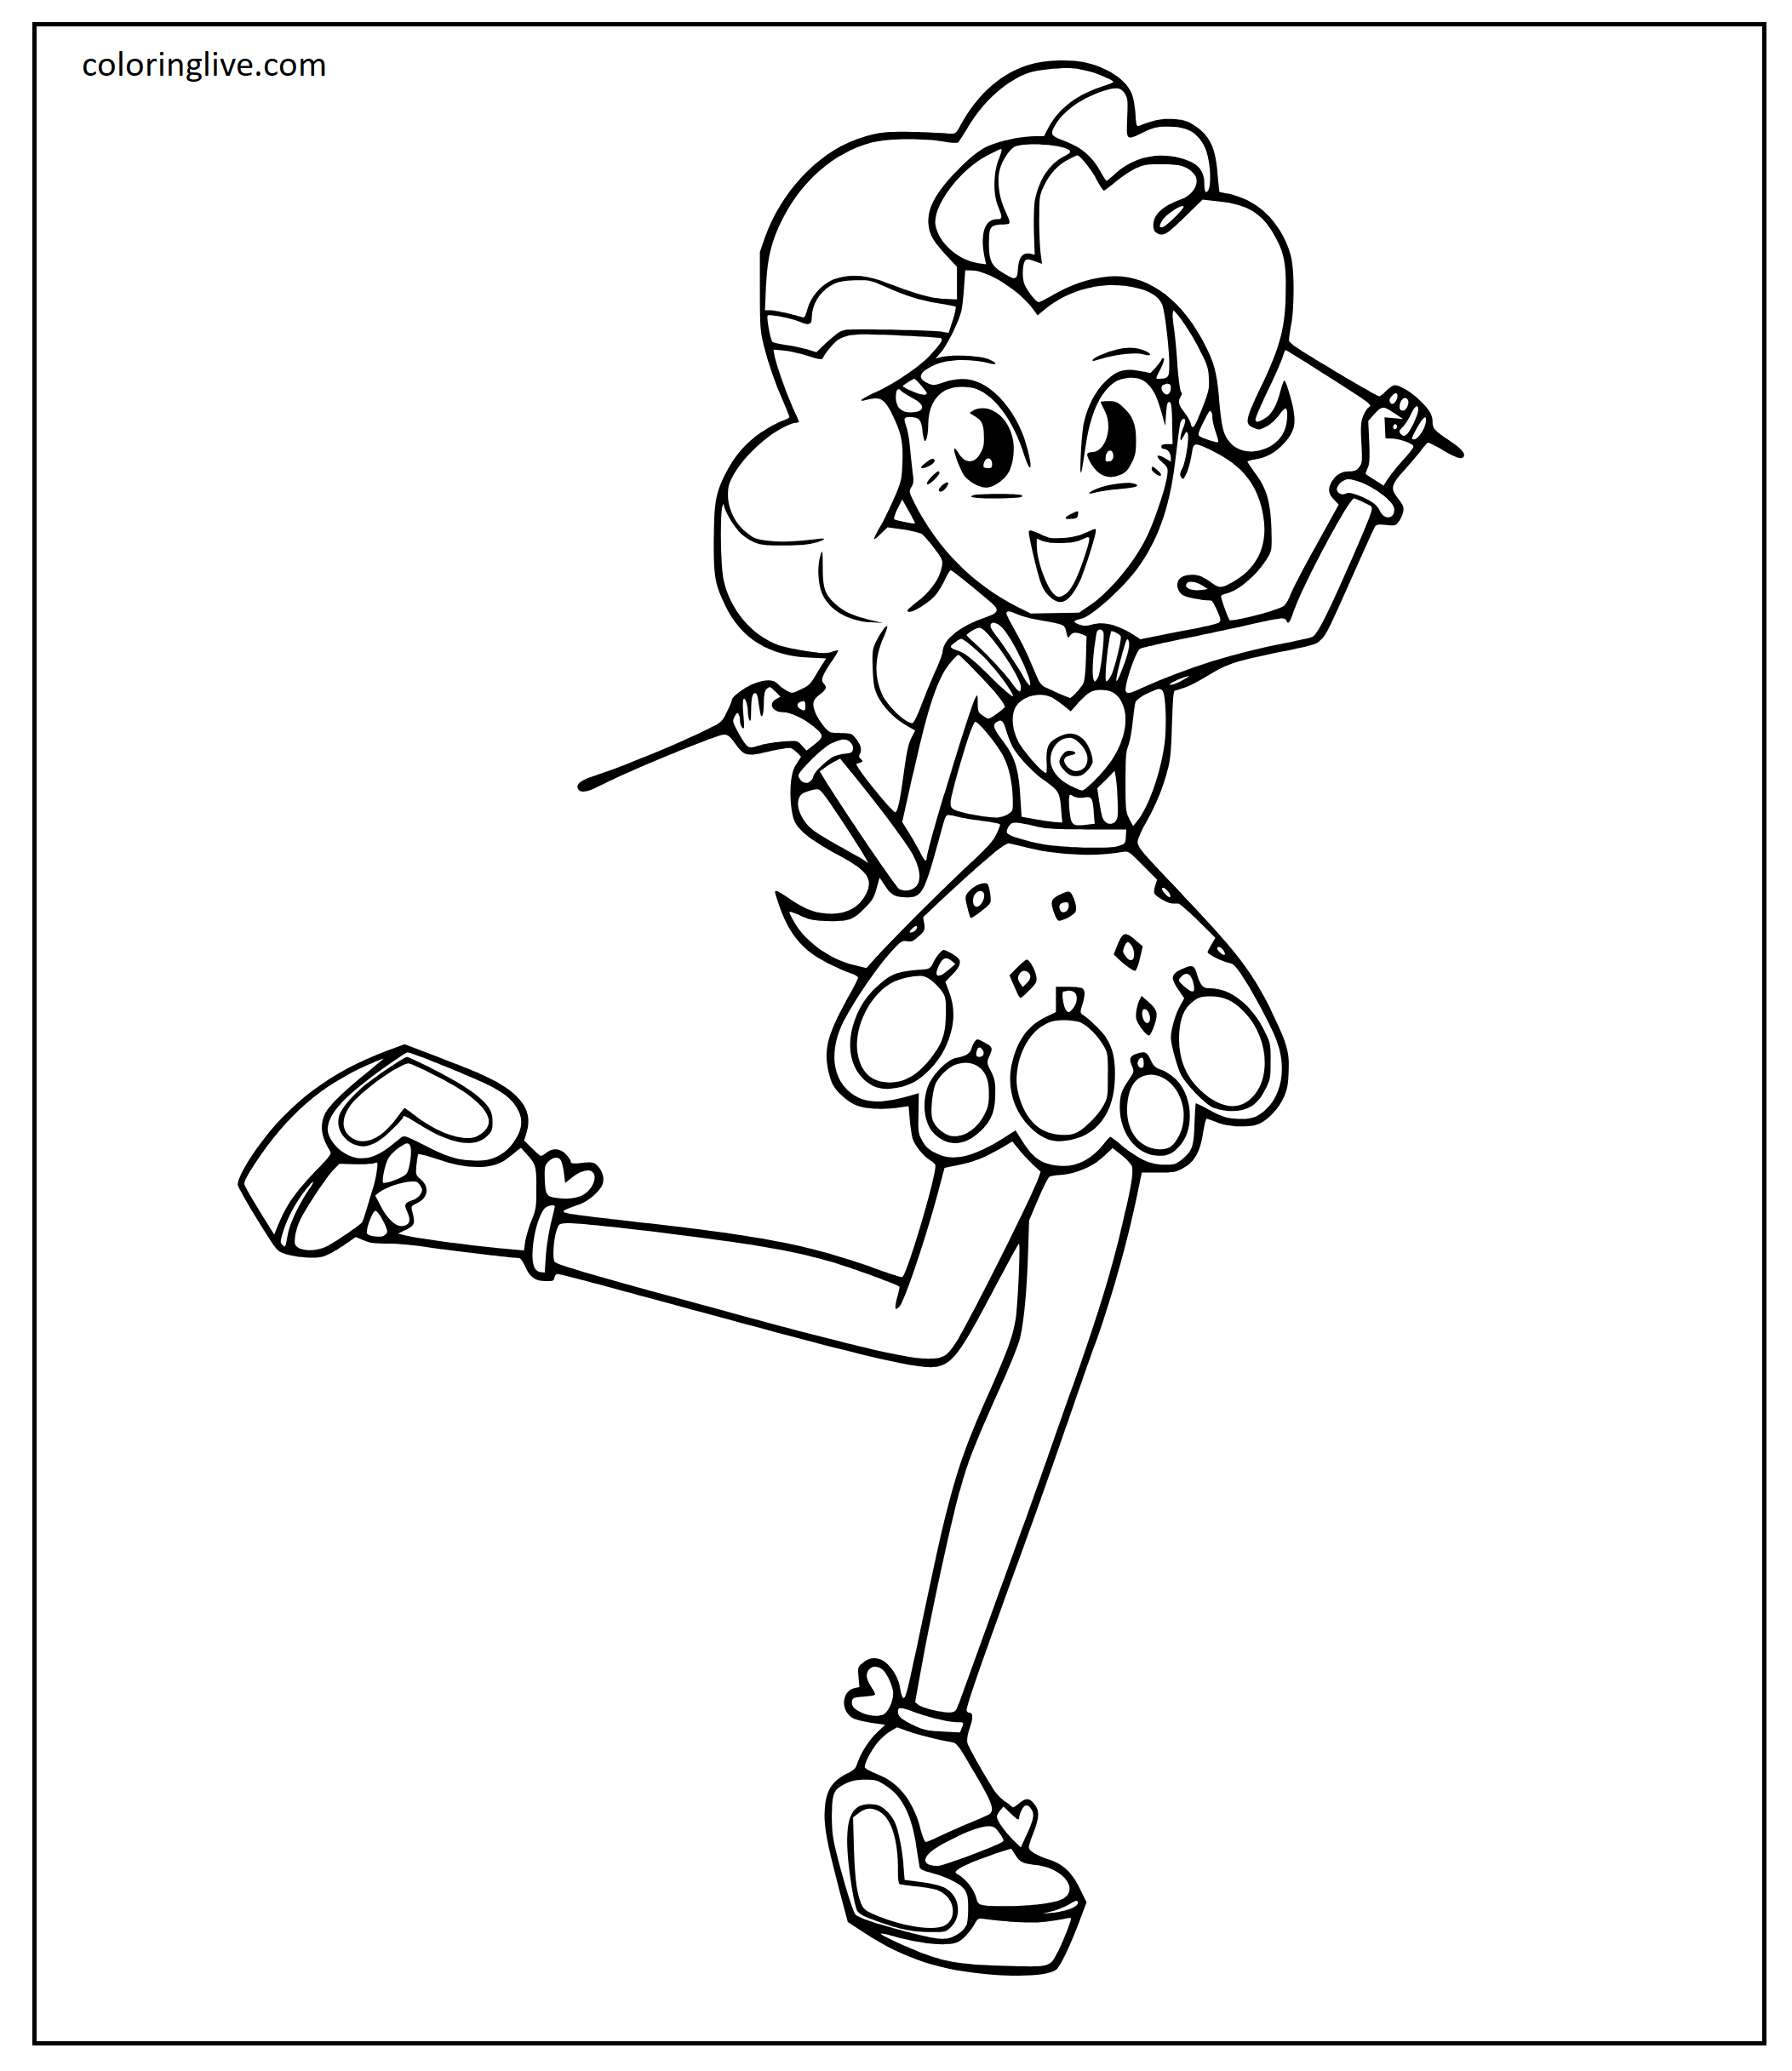 Printable Pinkie Pie holding drumsticks Coloring Page for kids.